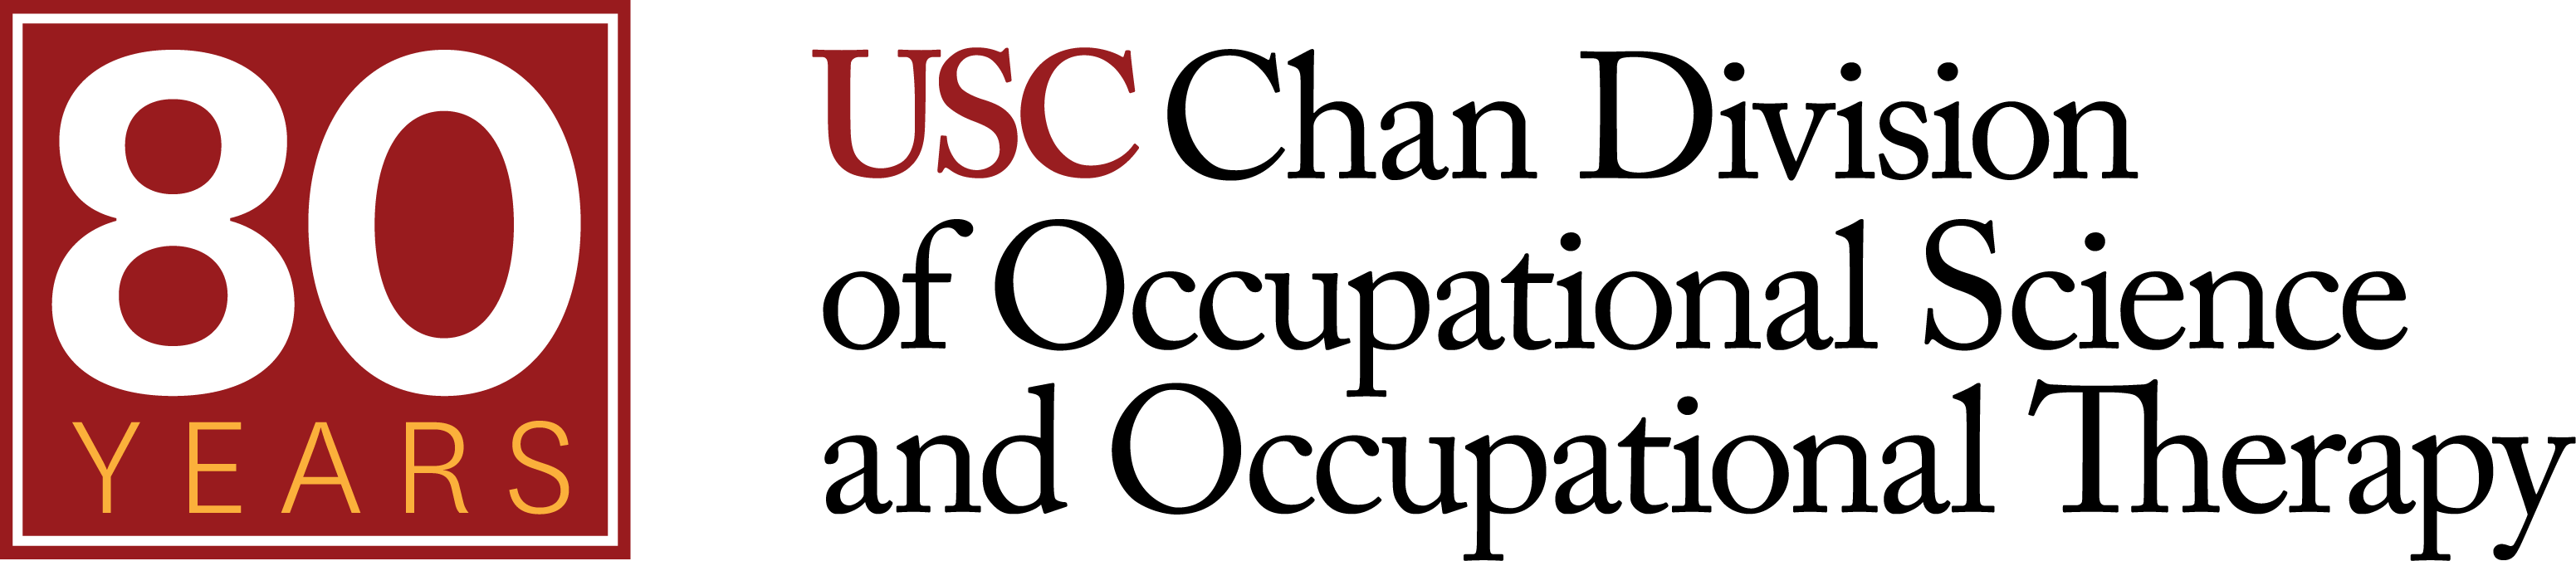 USC Chan Division of Occupational Science and Occupational Therapy